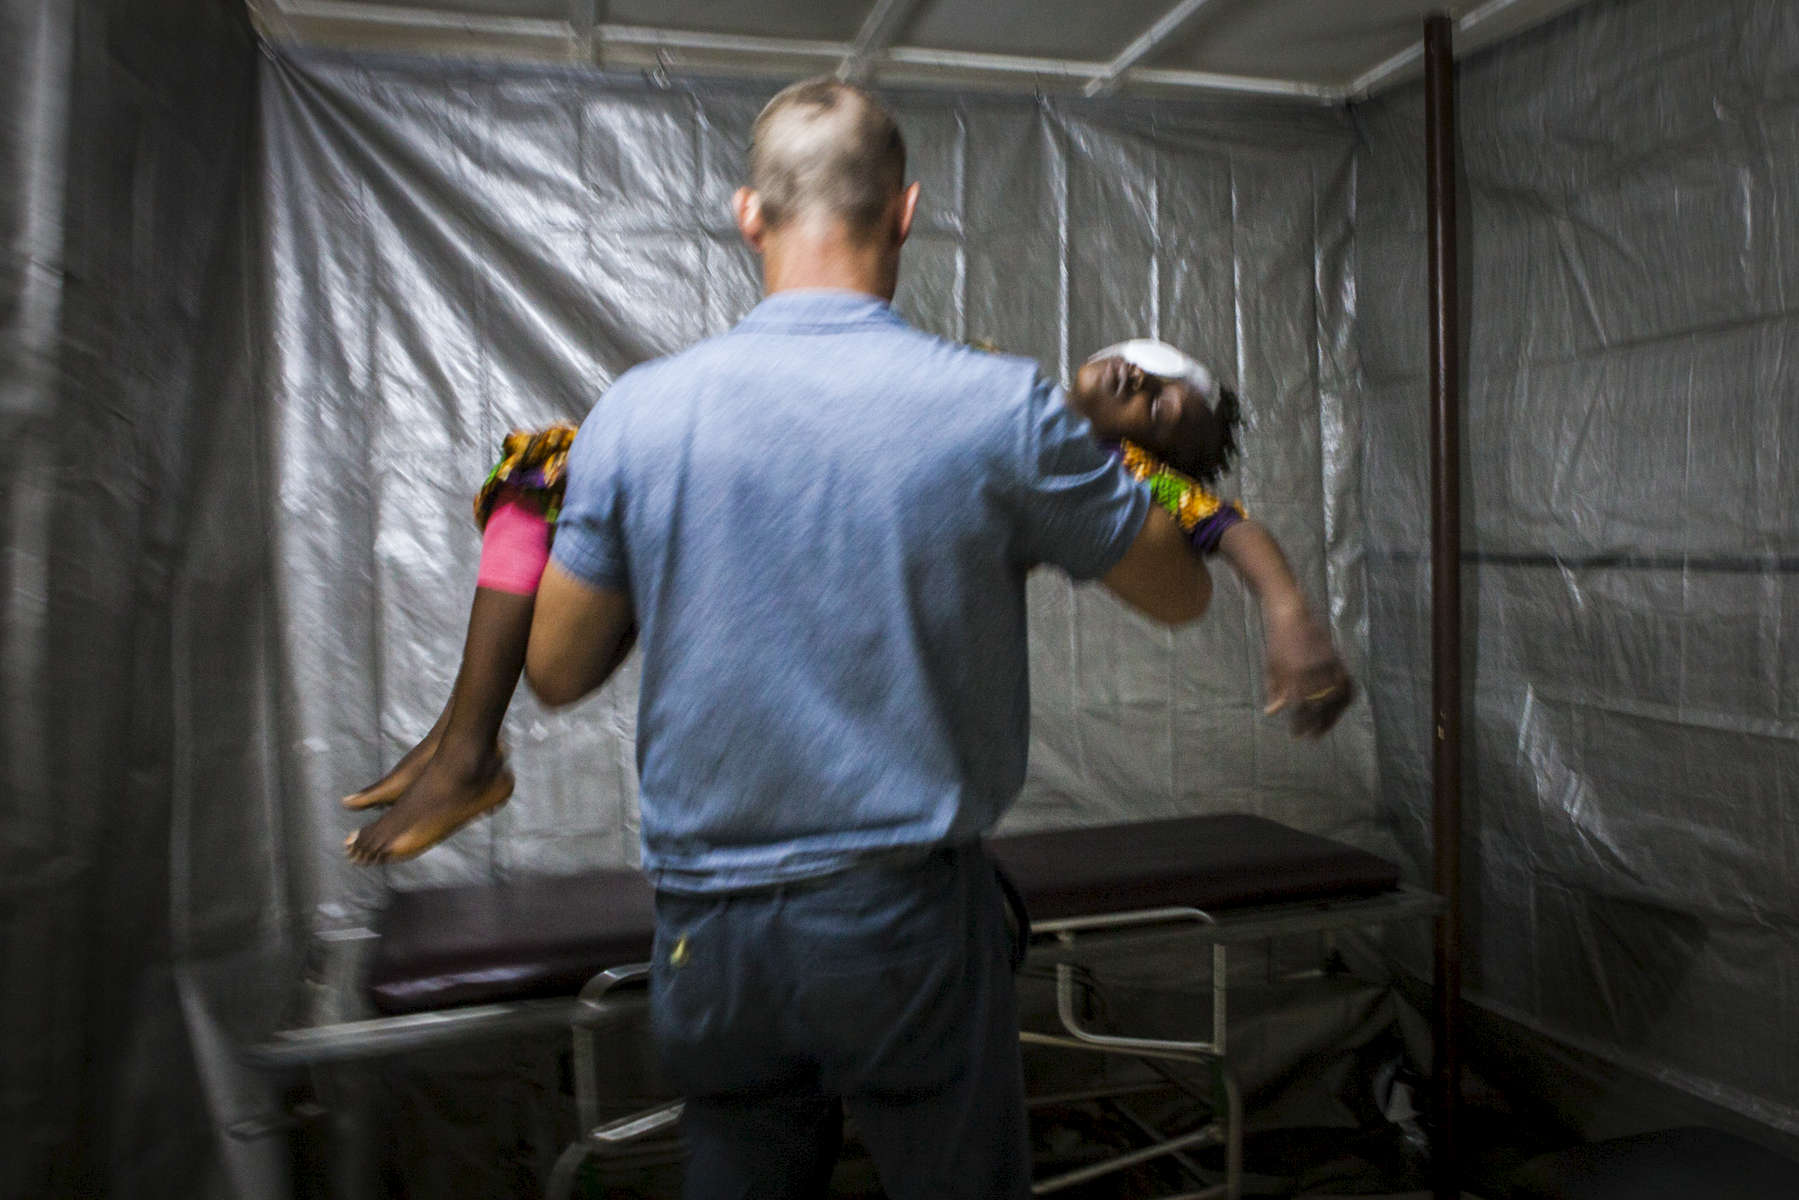 Dr. Ian Crozier carries a sedated Aminata Conteh after her cataract surgery in a makeshift operating room at the Kissy United Methodist Church Eye Hospital in Freetown, Sierra Leone. Dr. Ian Crozier became ill while volunteering for the World Health Organization during the Ebola outbreak in West Africa. Months after recovering from the virus in the United States, Dr. Crozier began to experience intense pain and fading eye sight. After testing doctors found that the Ebola virus still remained in his eye despite testing negative in his blood. 